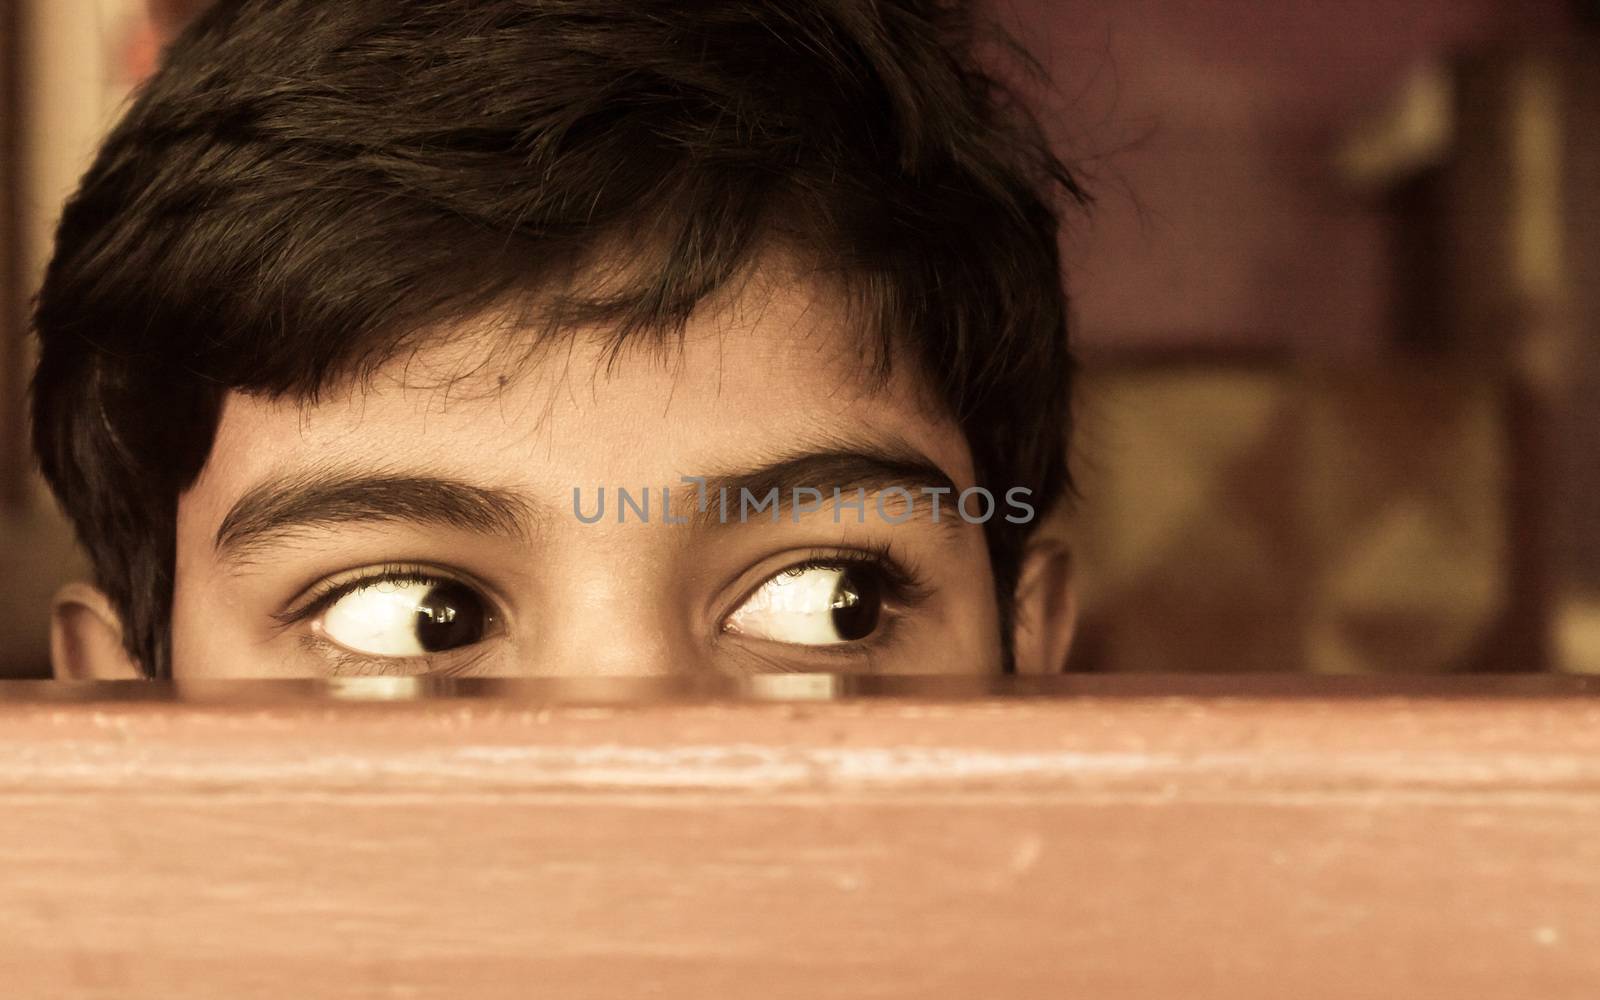 Young boy curiously looking outside through a window. by sudiptabhowmick